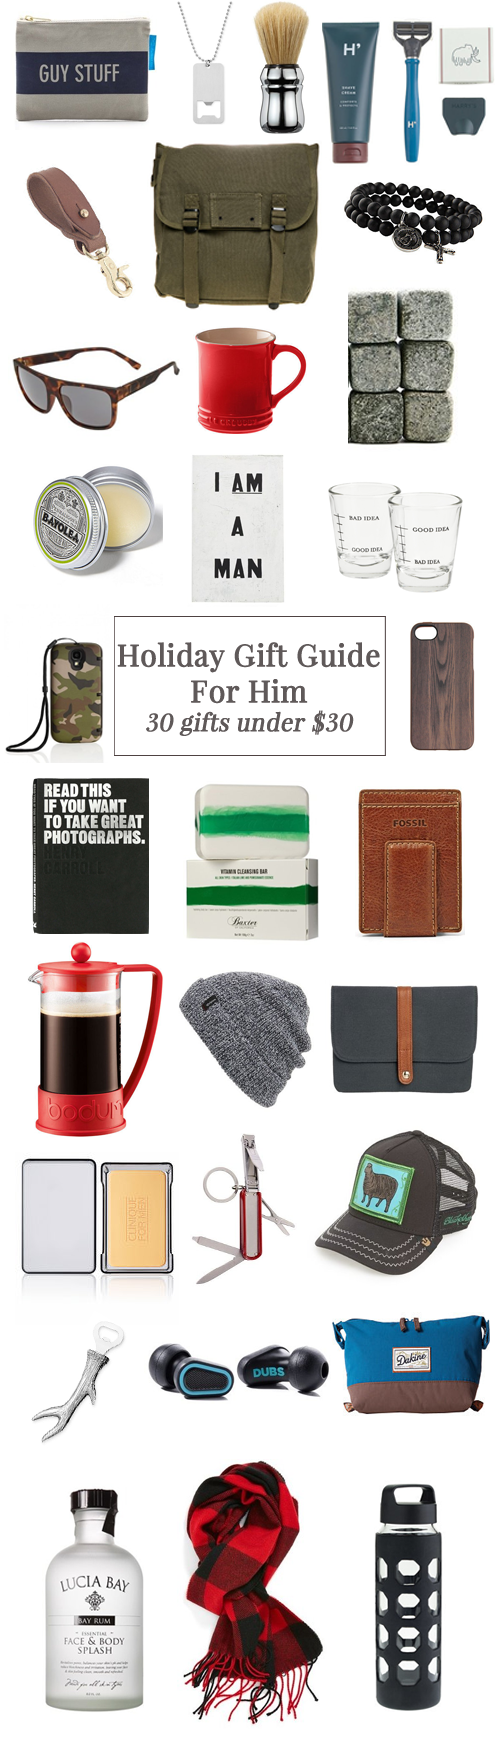 gadget gifts for dad christmas